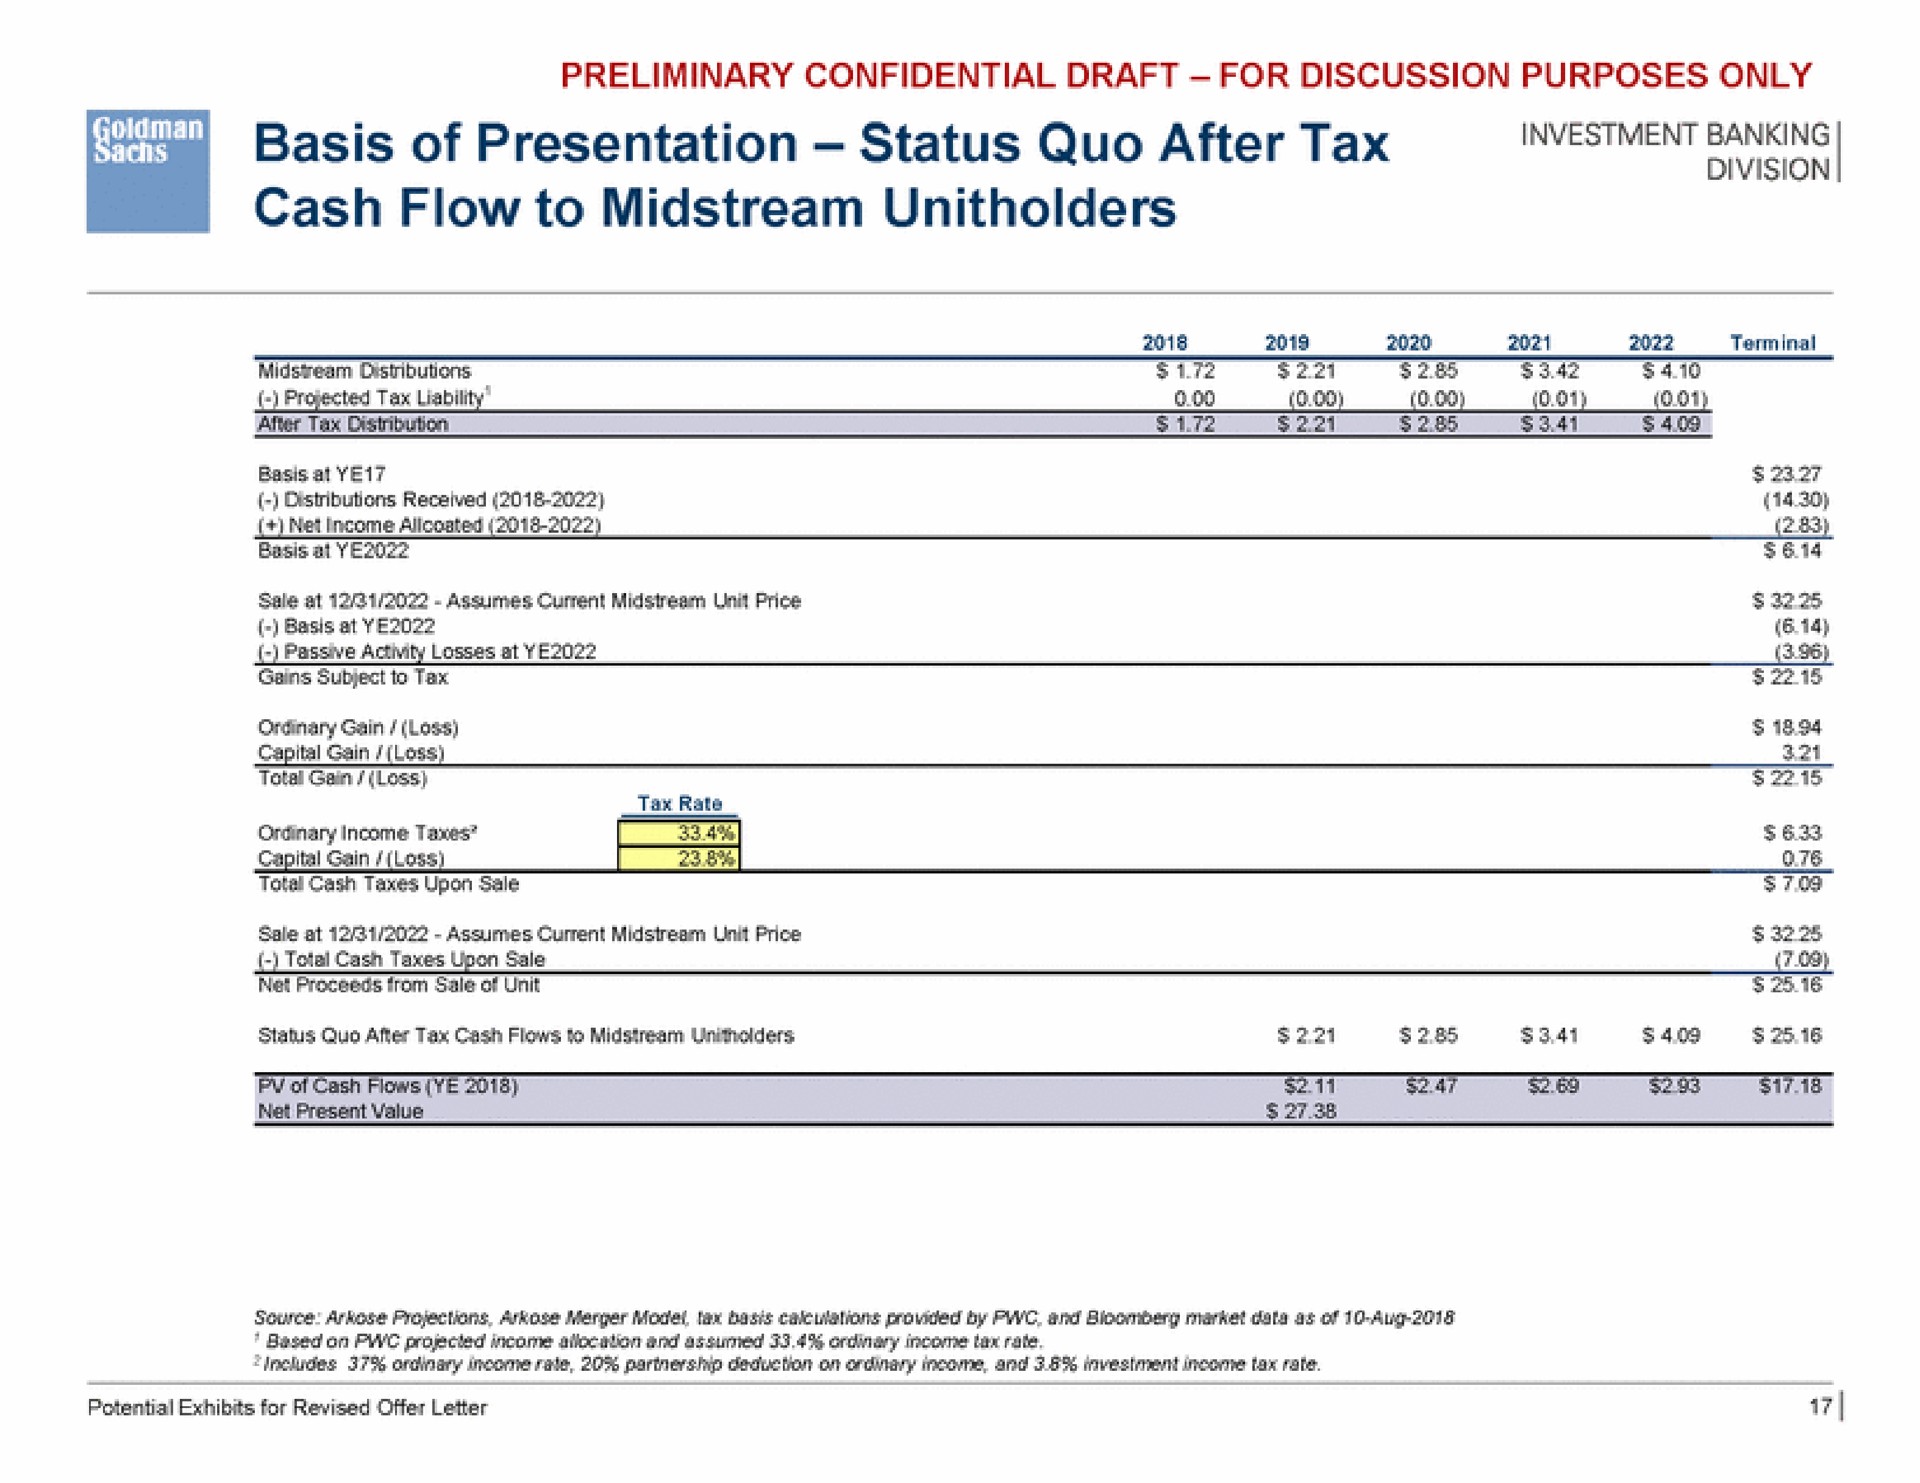 basis of presentation status quo after tax cash flow to midstream investment banking | Goldman Sachs